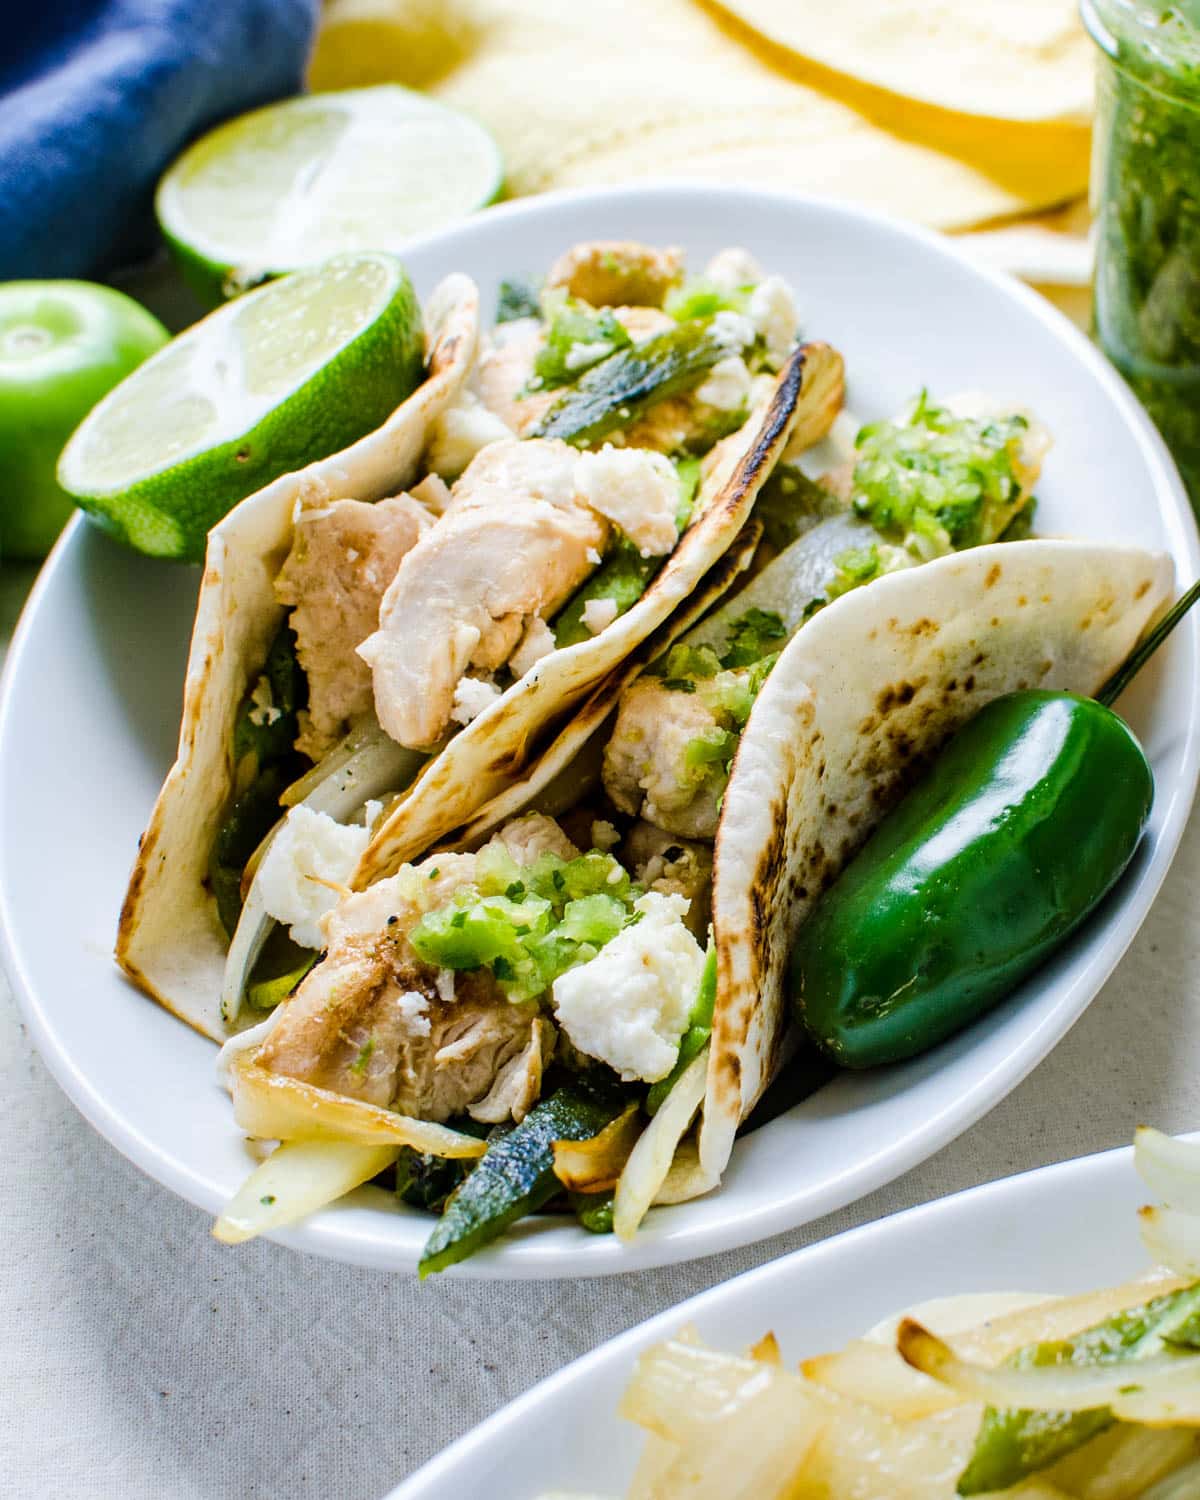 chicken soft tacos with poblano peppers and onions and tomatillo salsa.